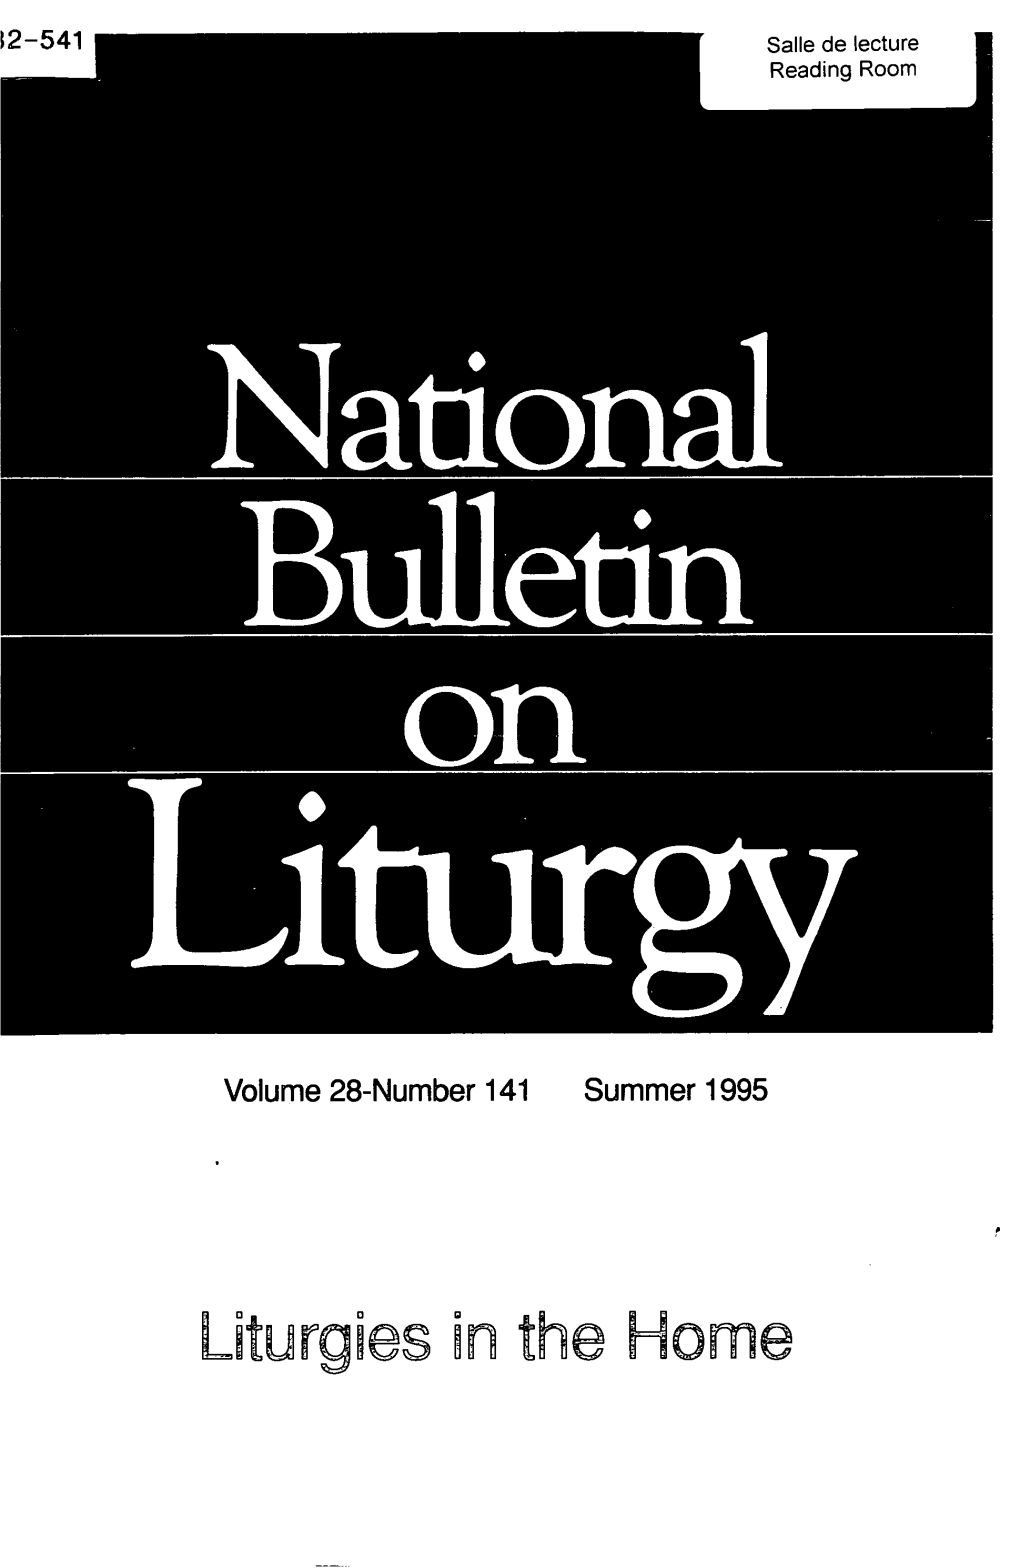 Liturgies ~N the Home National Bulletin on Liturgy the Price of a Single Issue Is Now $5.00